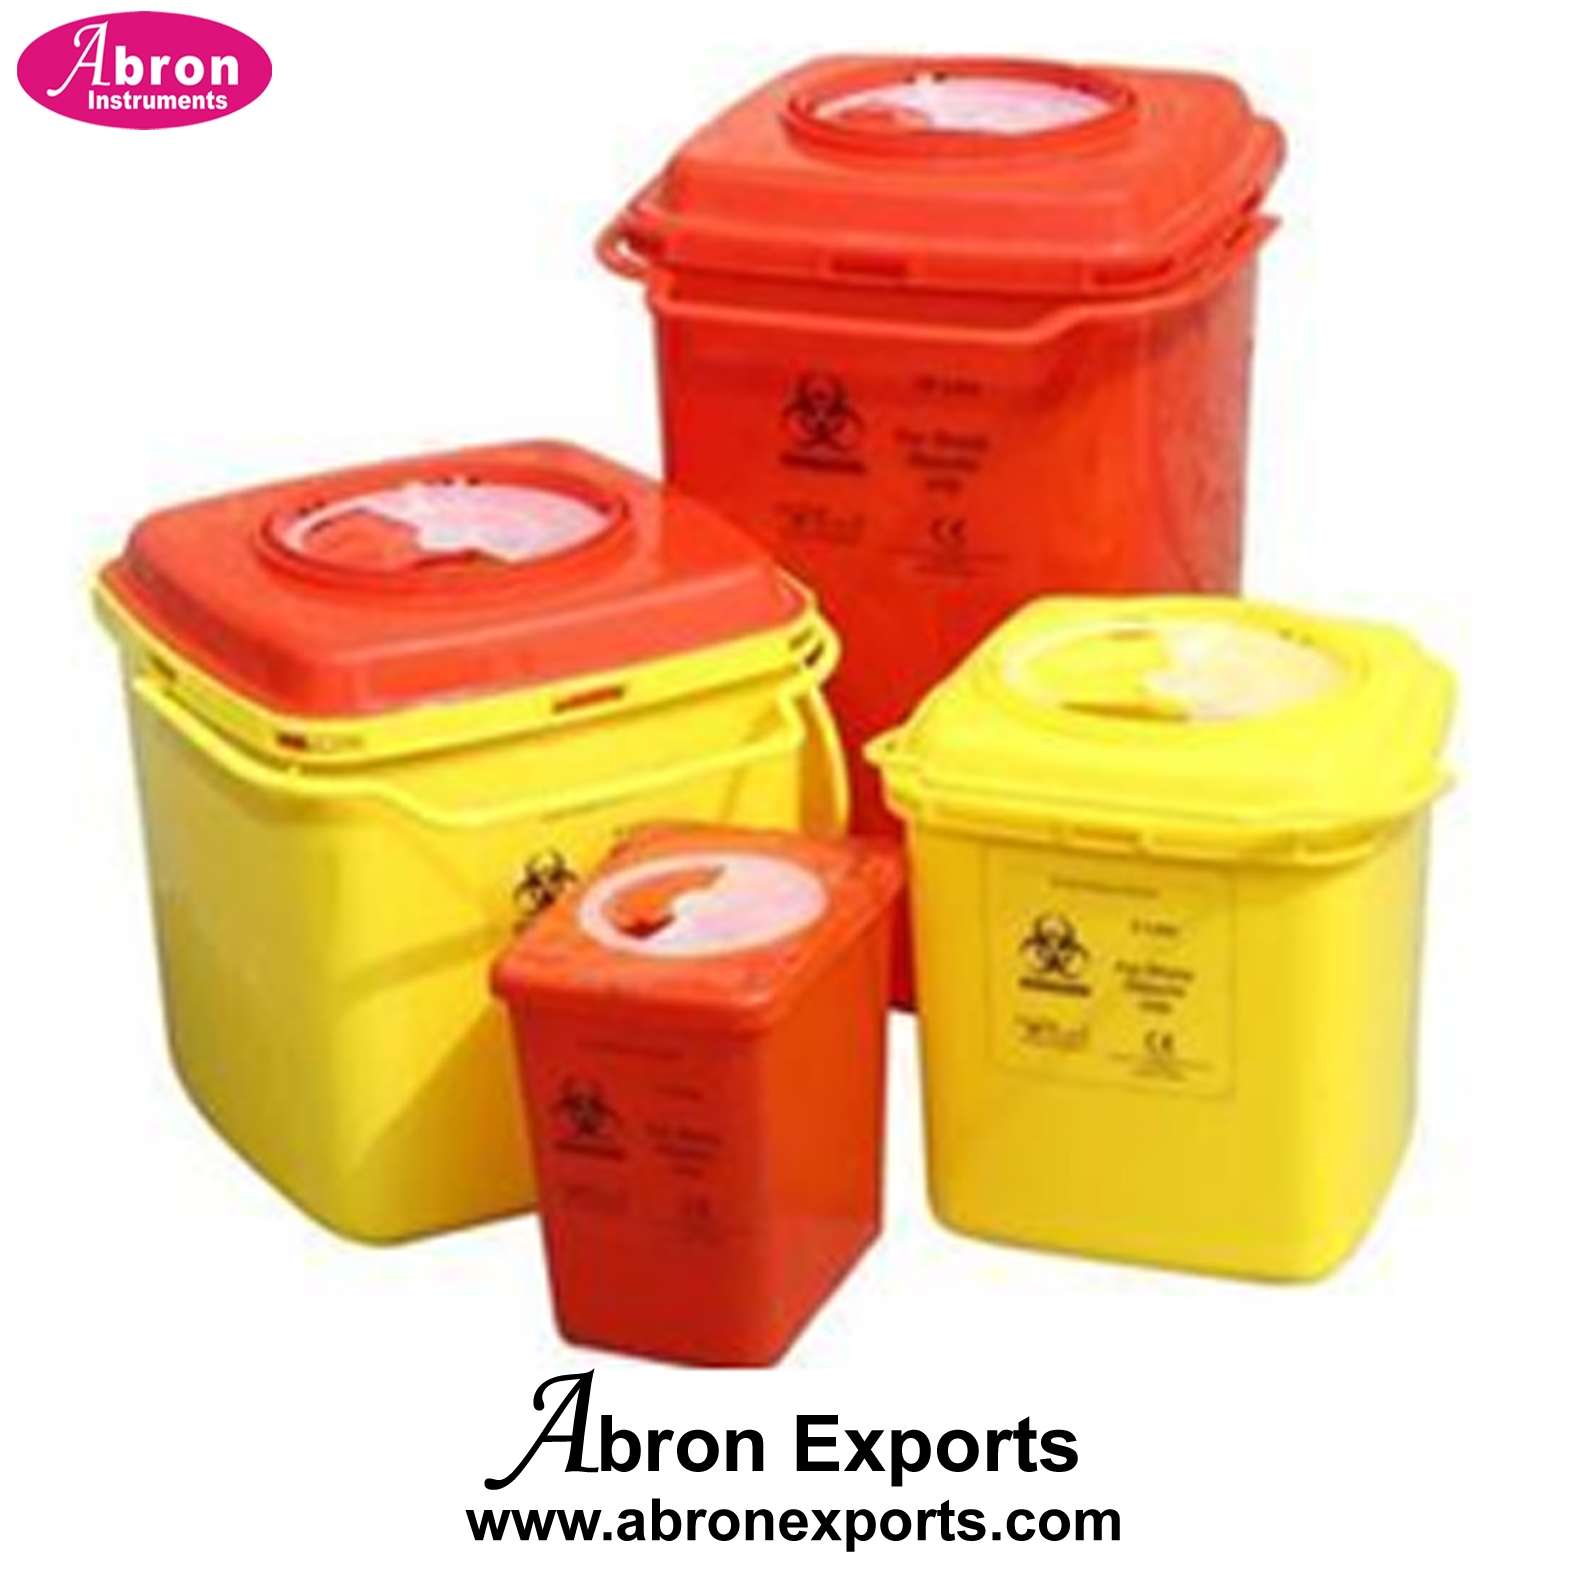 Biohazardous container Sharps safety boxes 3 liters 5lt medical hospital surgical abron AM-555-BX05